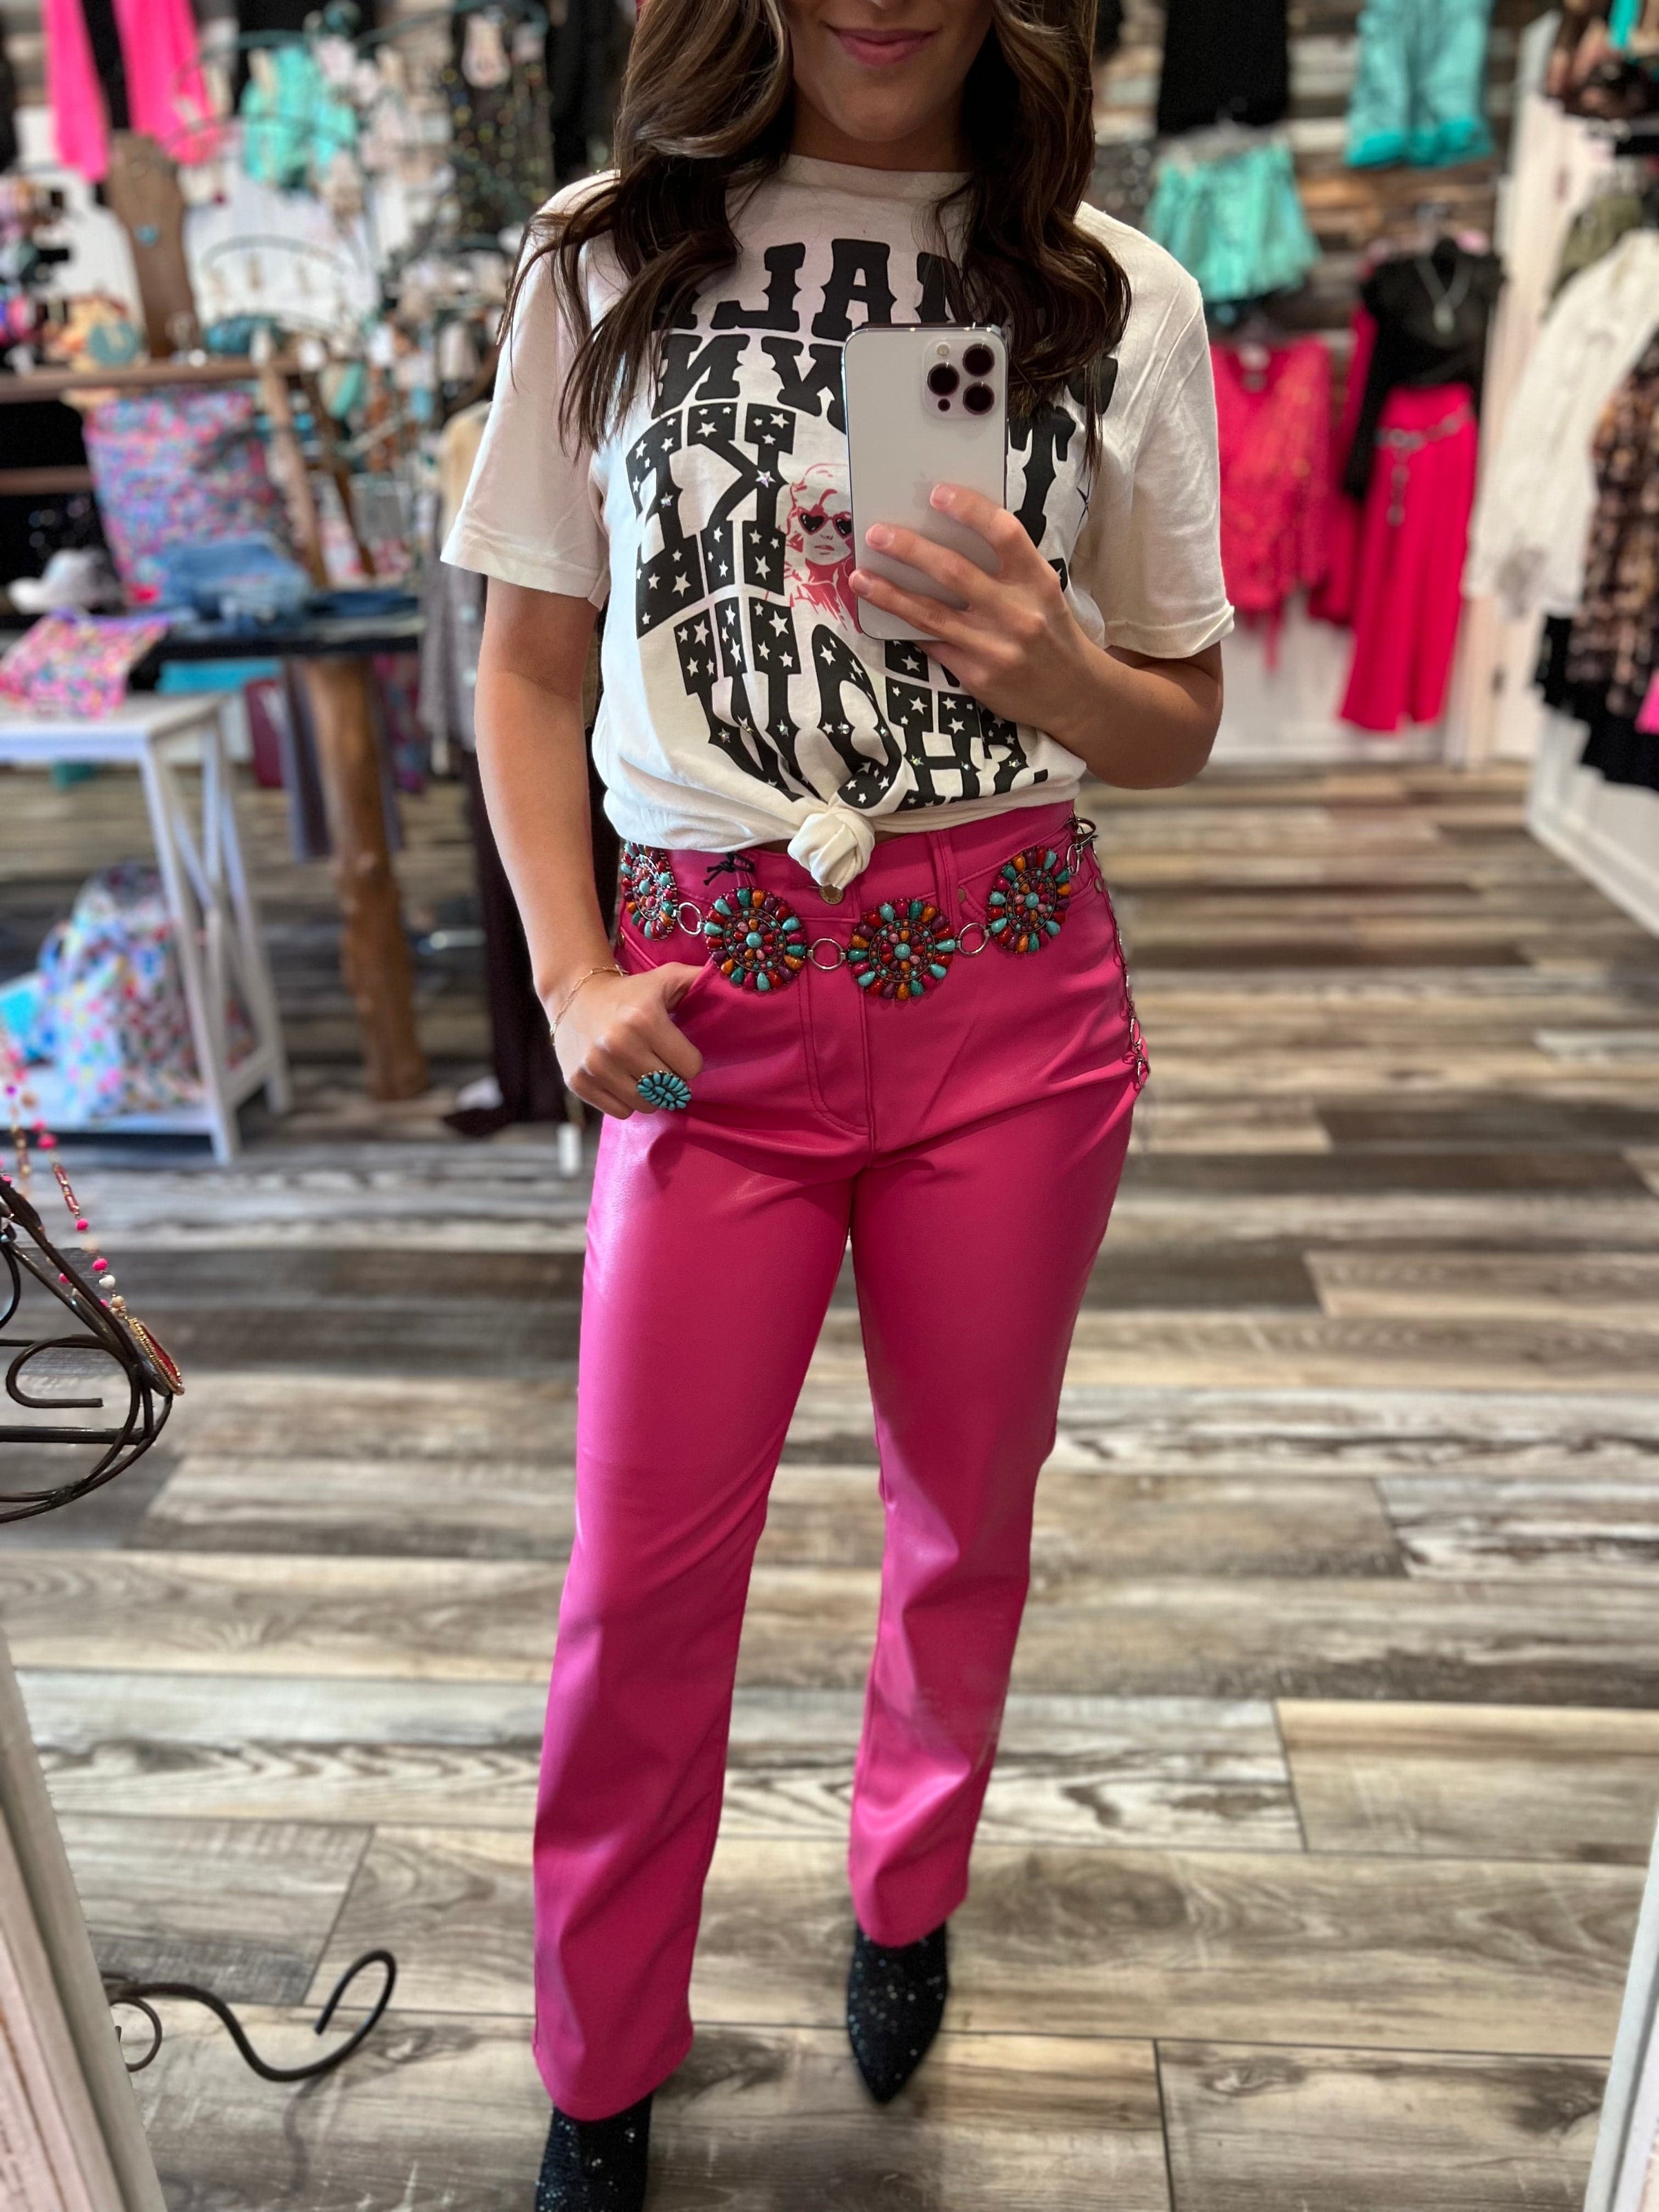 Dressy Pink Pants - Straight A Style | Hot pink pants, Pink pants outfit,  Light pink pants